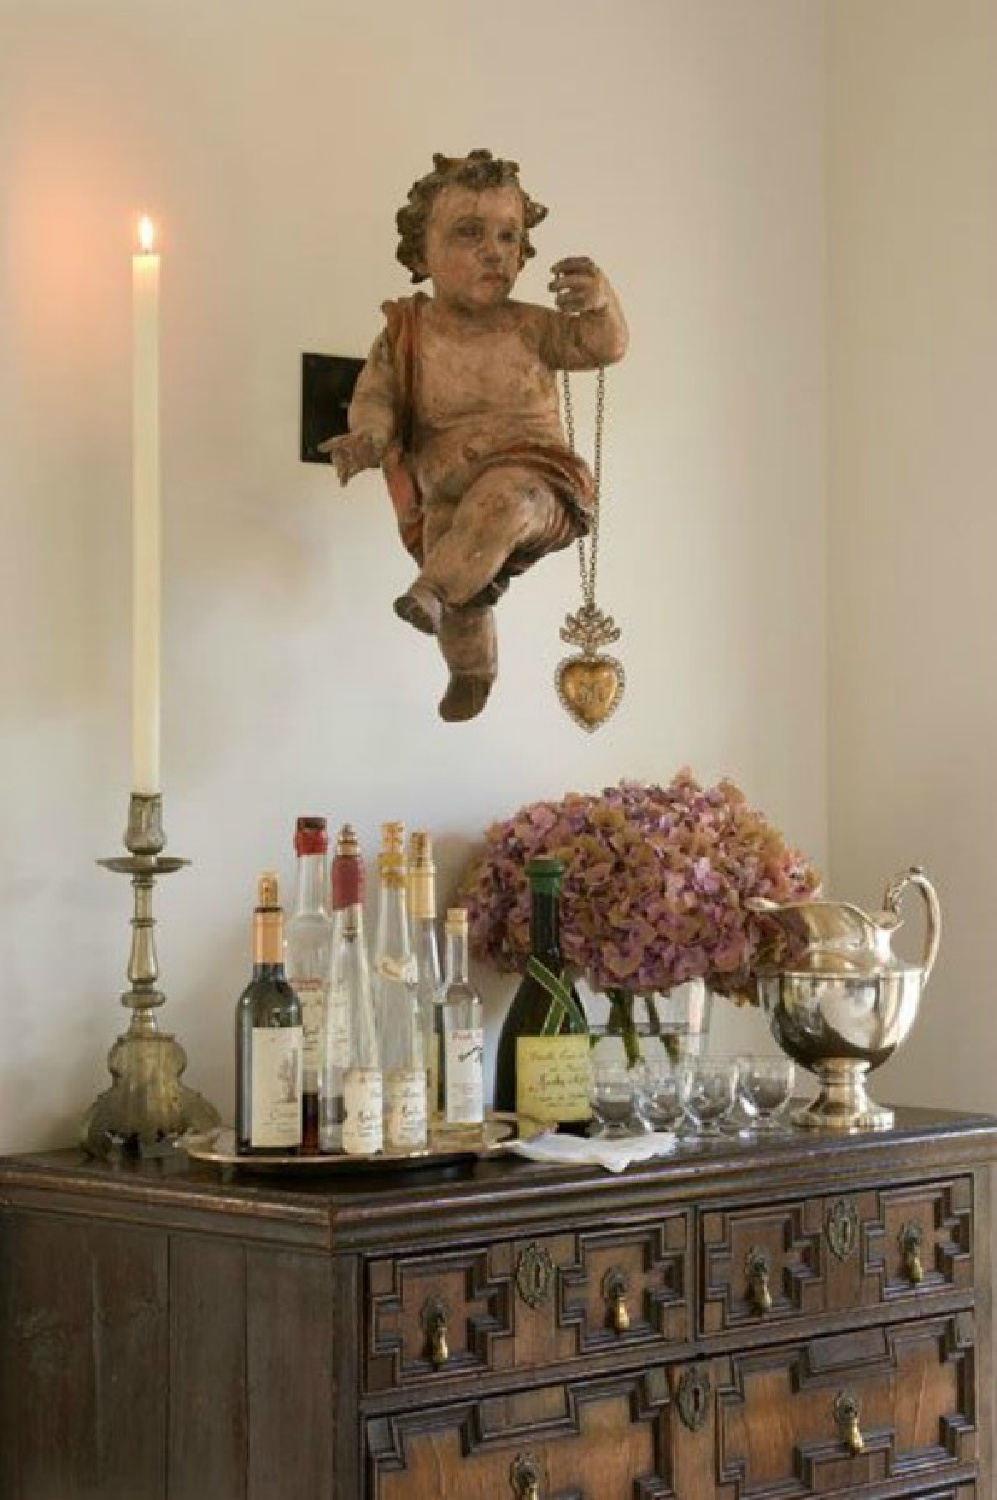 Exquisite cherub with ex voto heart in a lovely Santa Fe home - Photo by Peter Vitale for Milieu. #frenchcountry #europeancountry #oldworldstyle #interiordesign #cherub